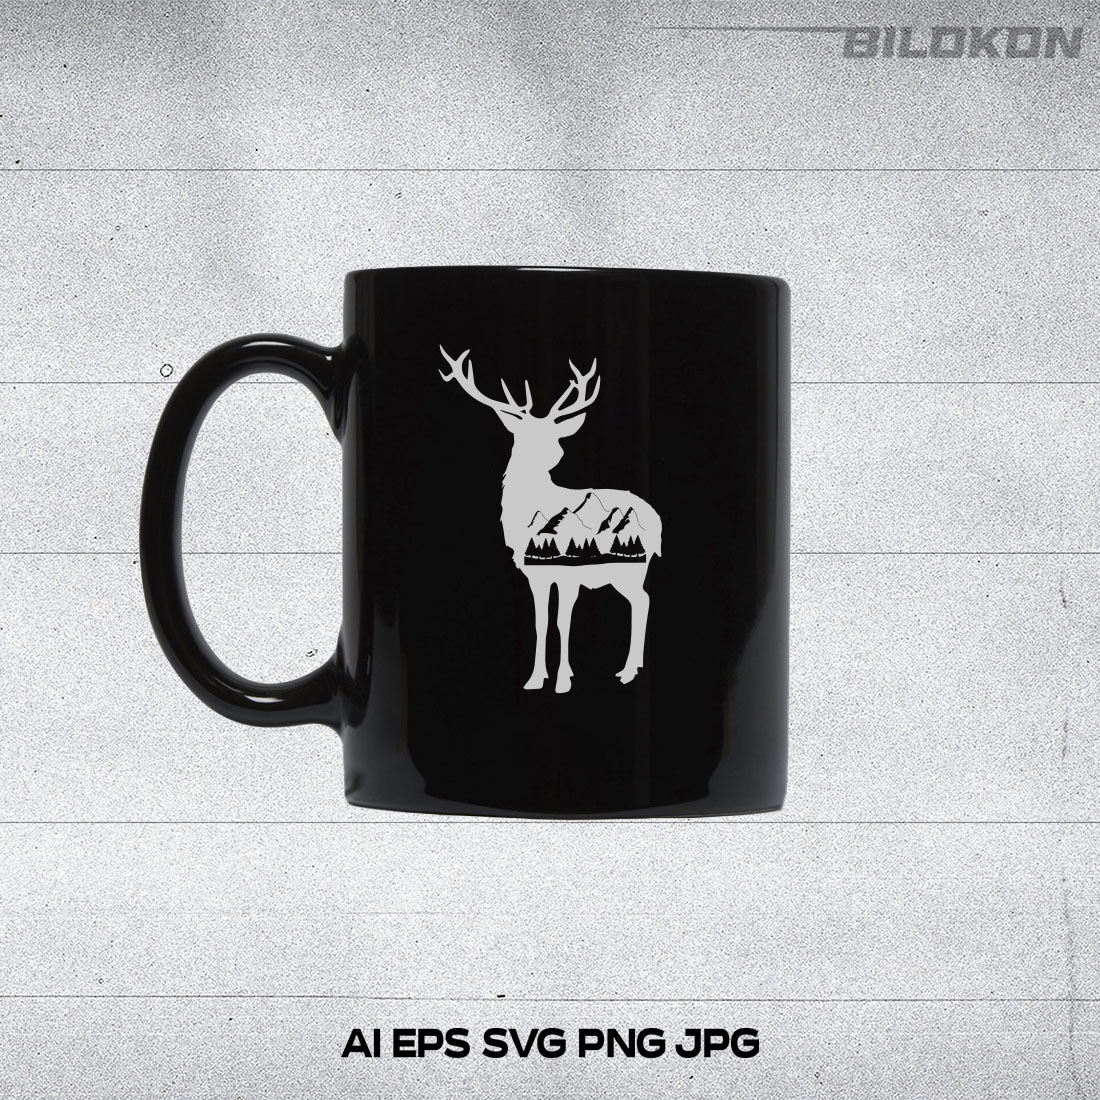 Deer and Mountains SVG Vector cup mockup.